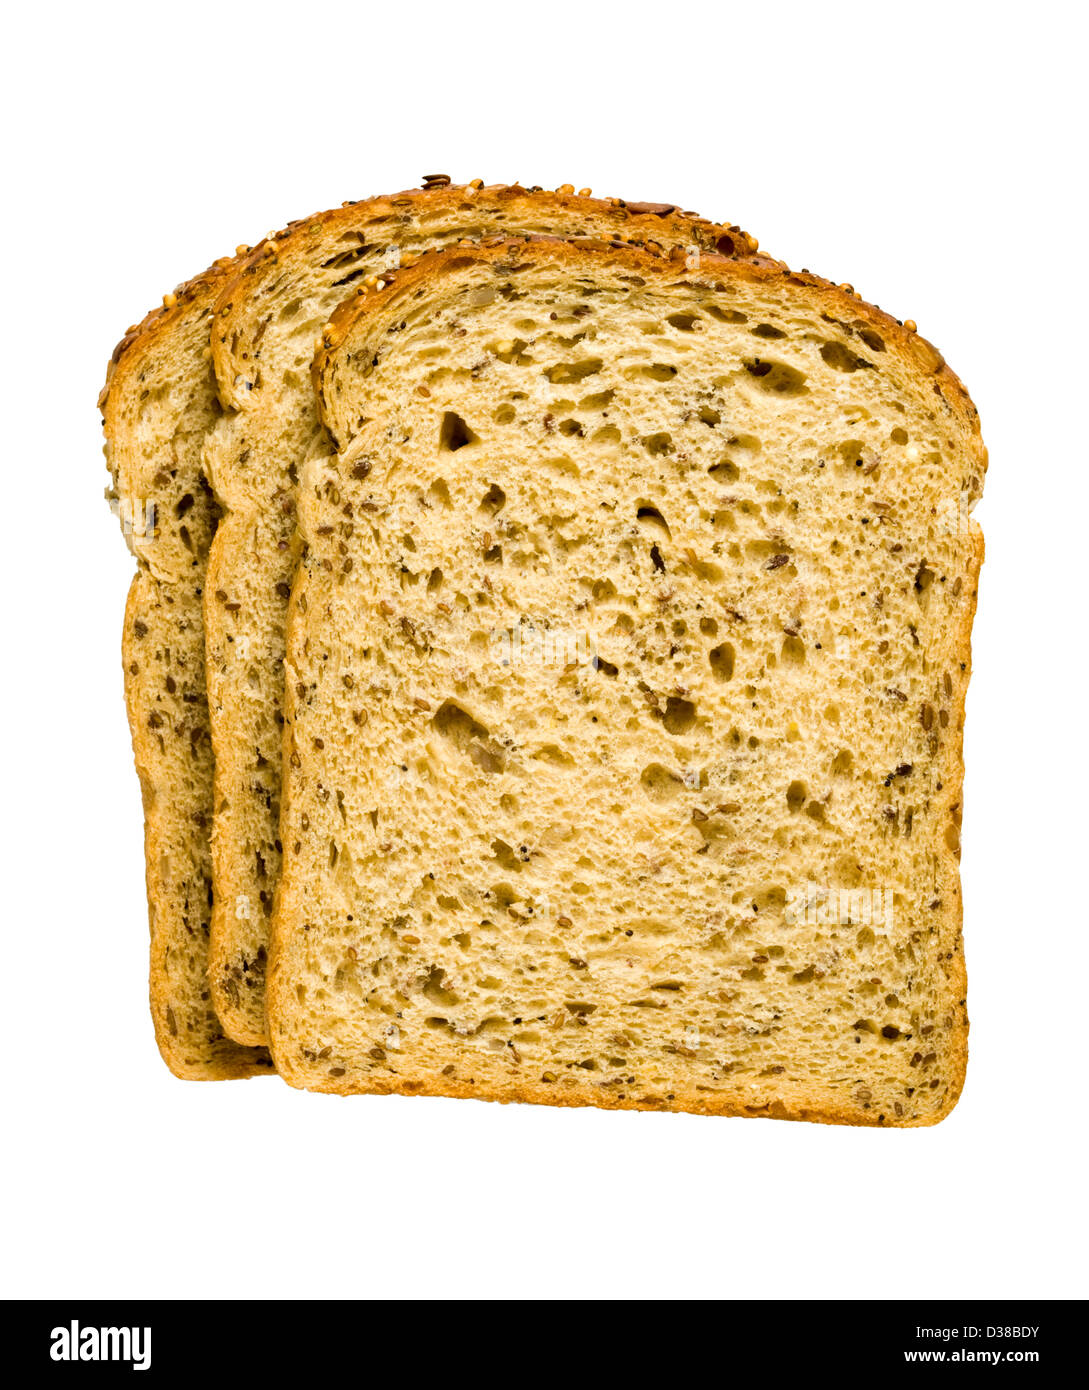 Three slices of brown (wholemeal) bread. Stock Photo